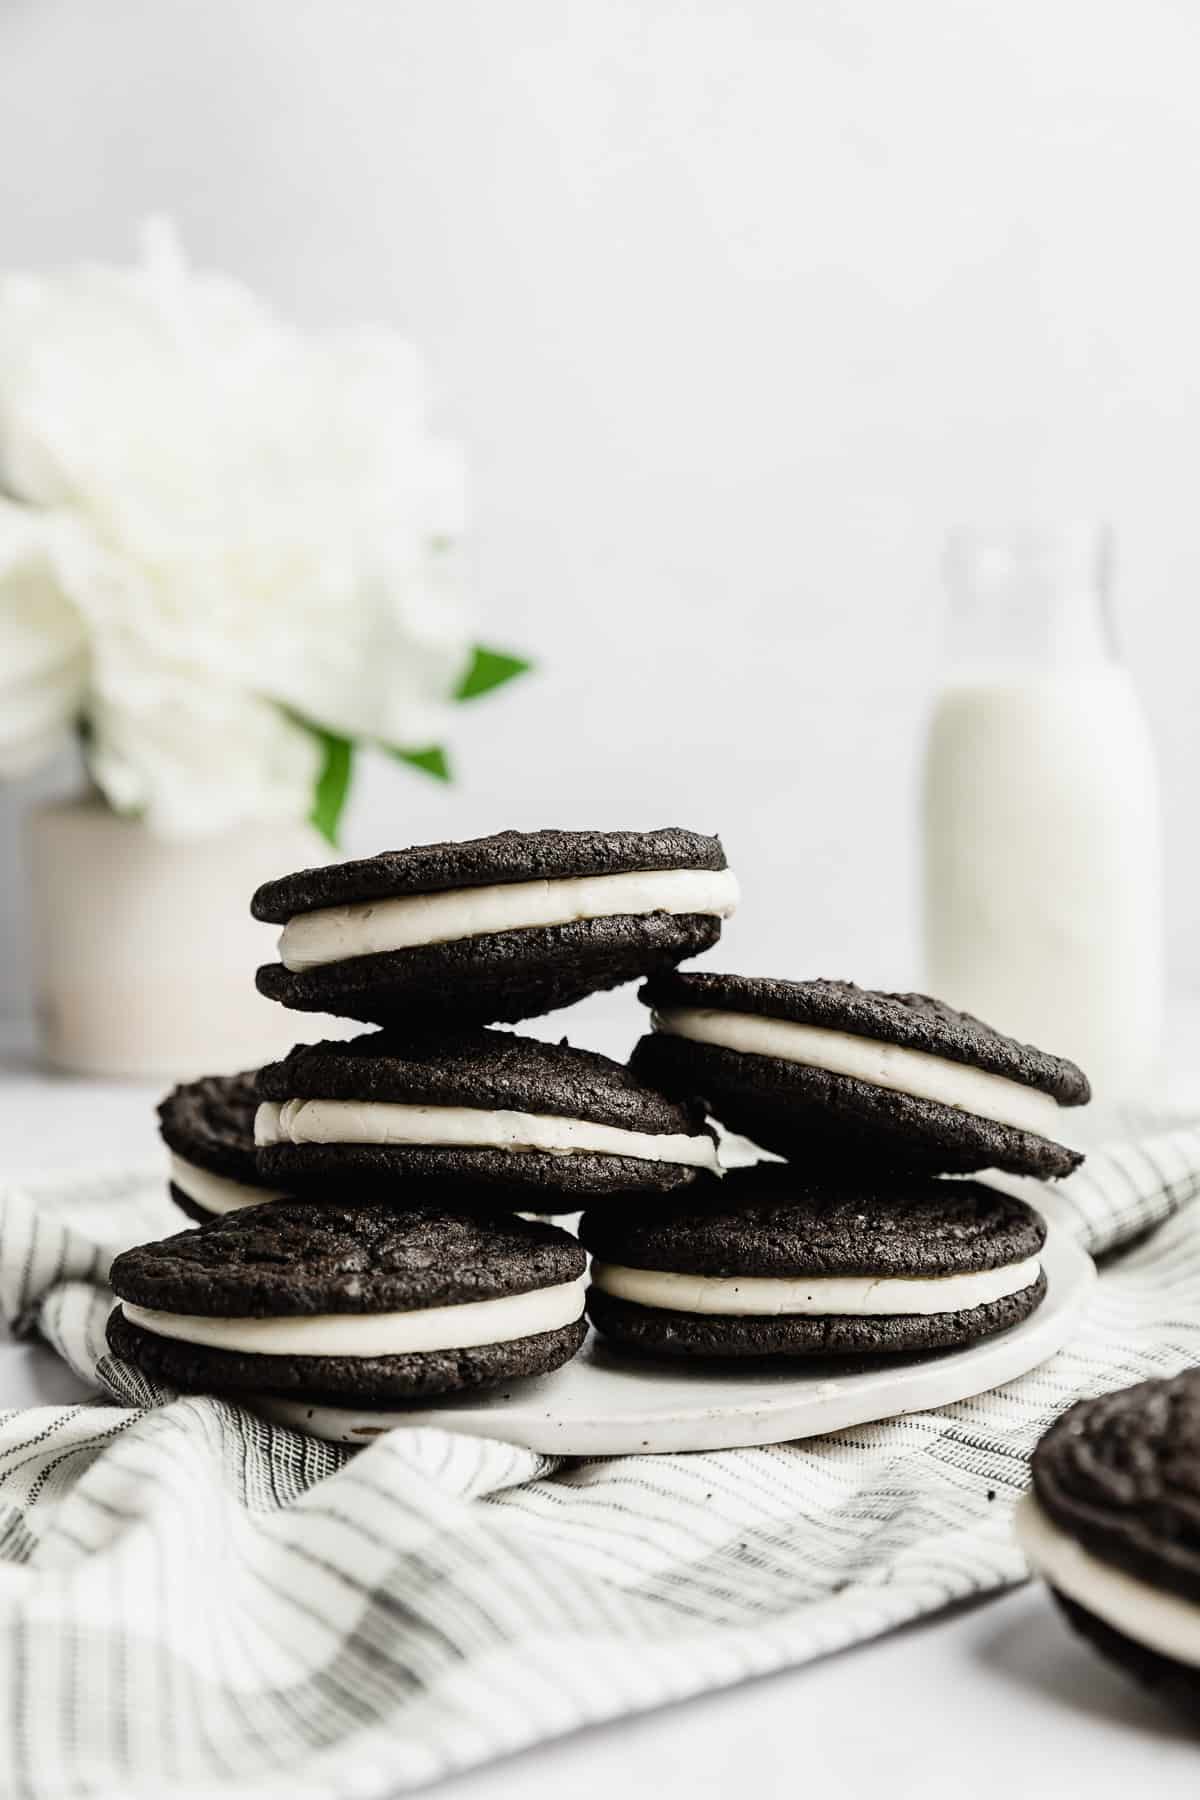 Homemade Oreo Cookies stacked on a white plate with a glass of milk and a white flower in the background.